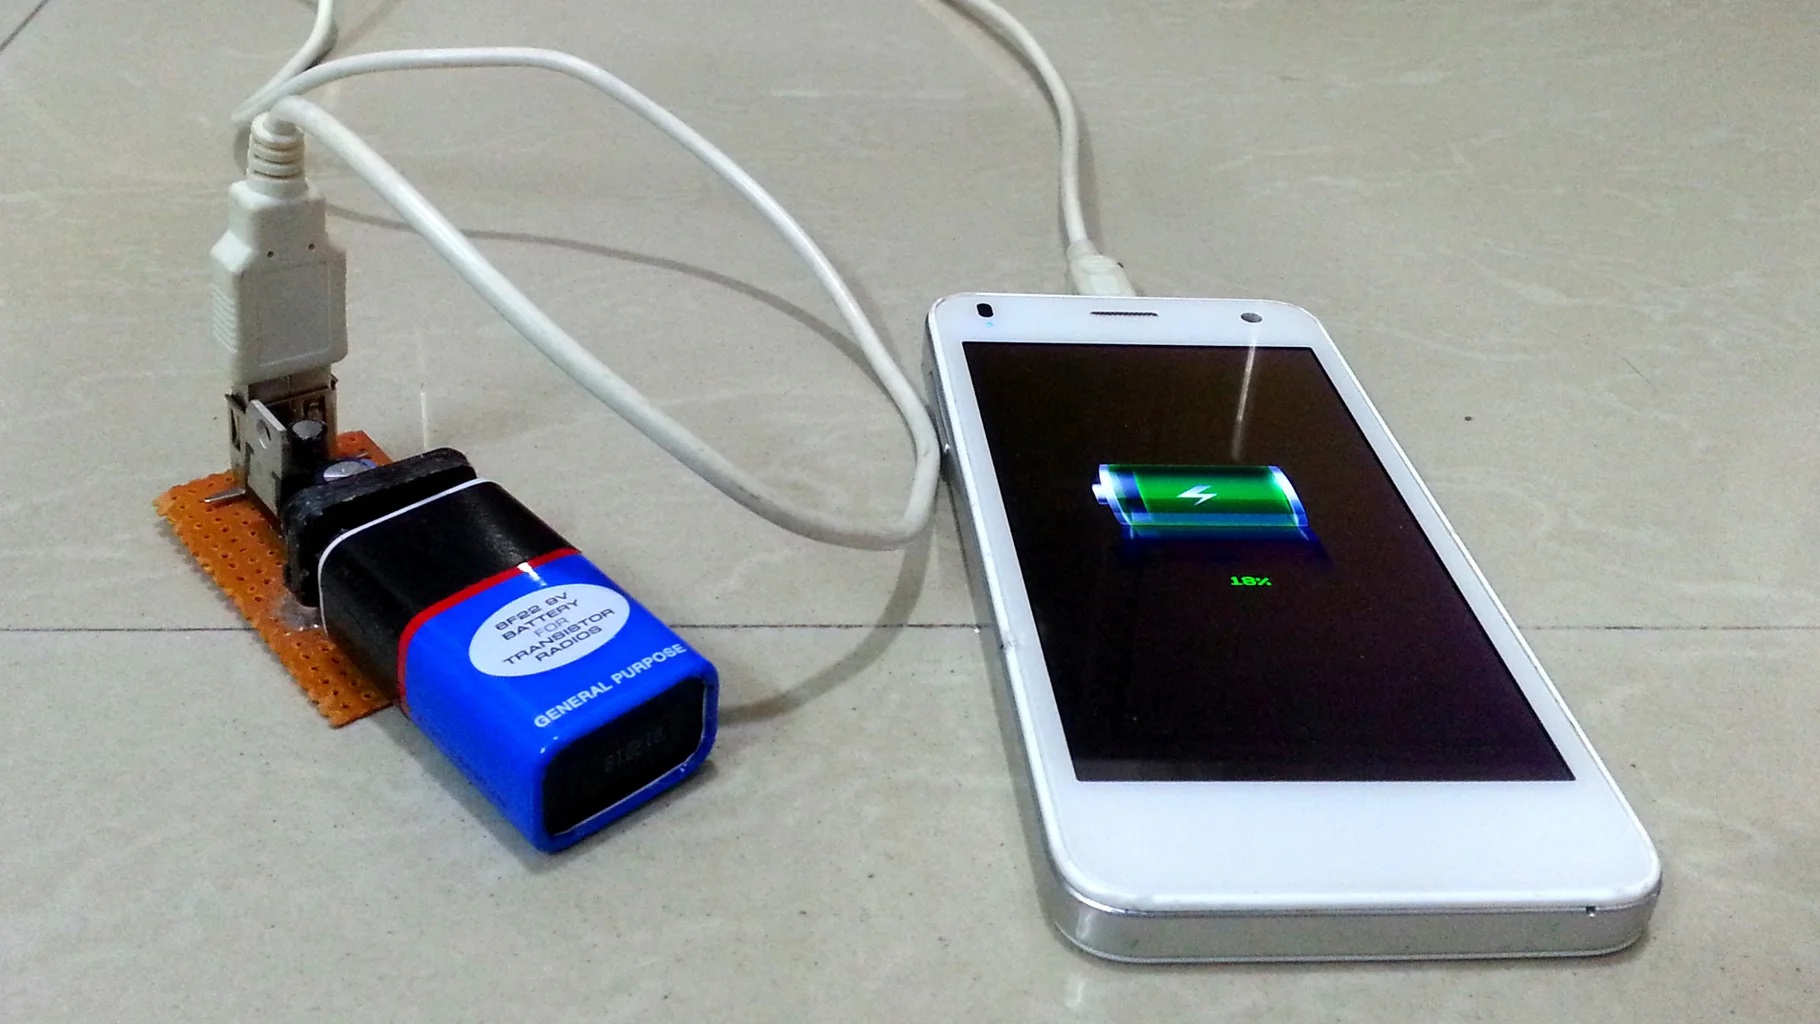 How To Make Cell Phone Charger | CellularNews